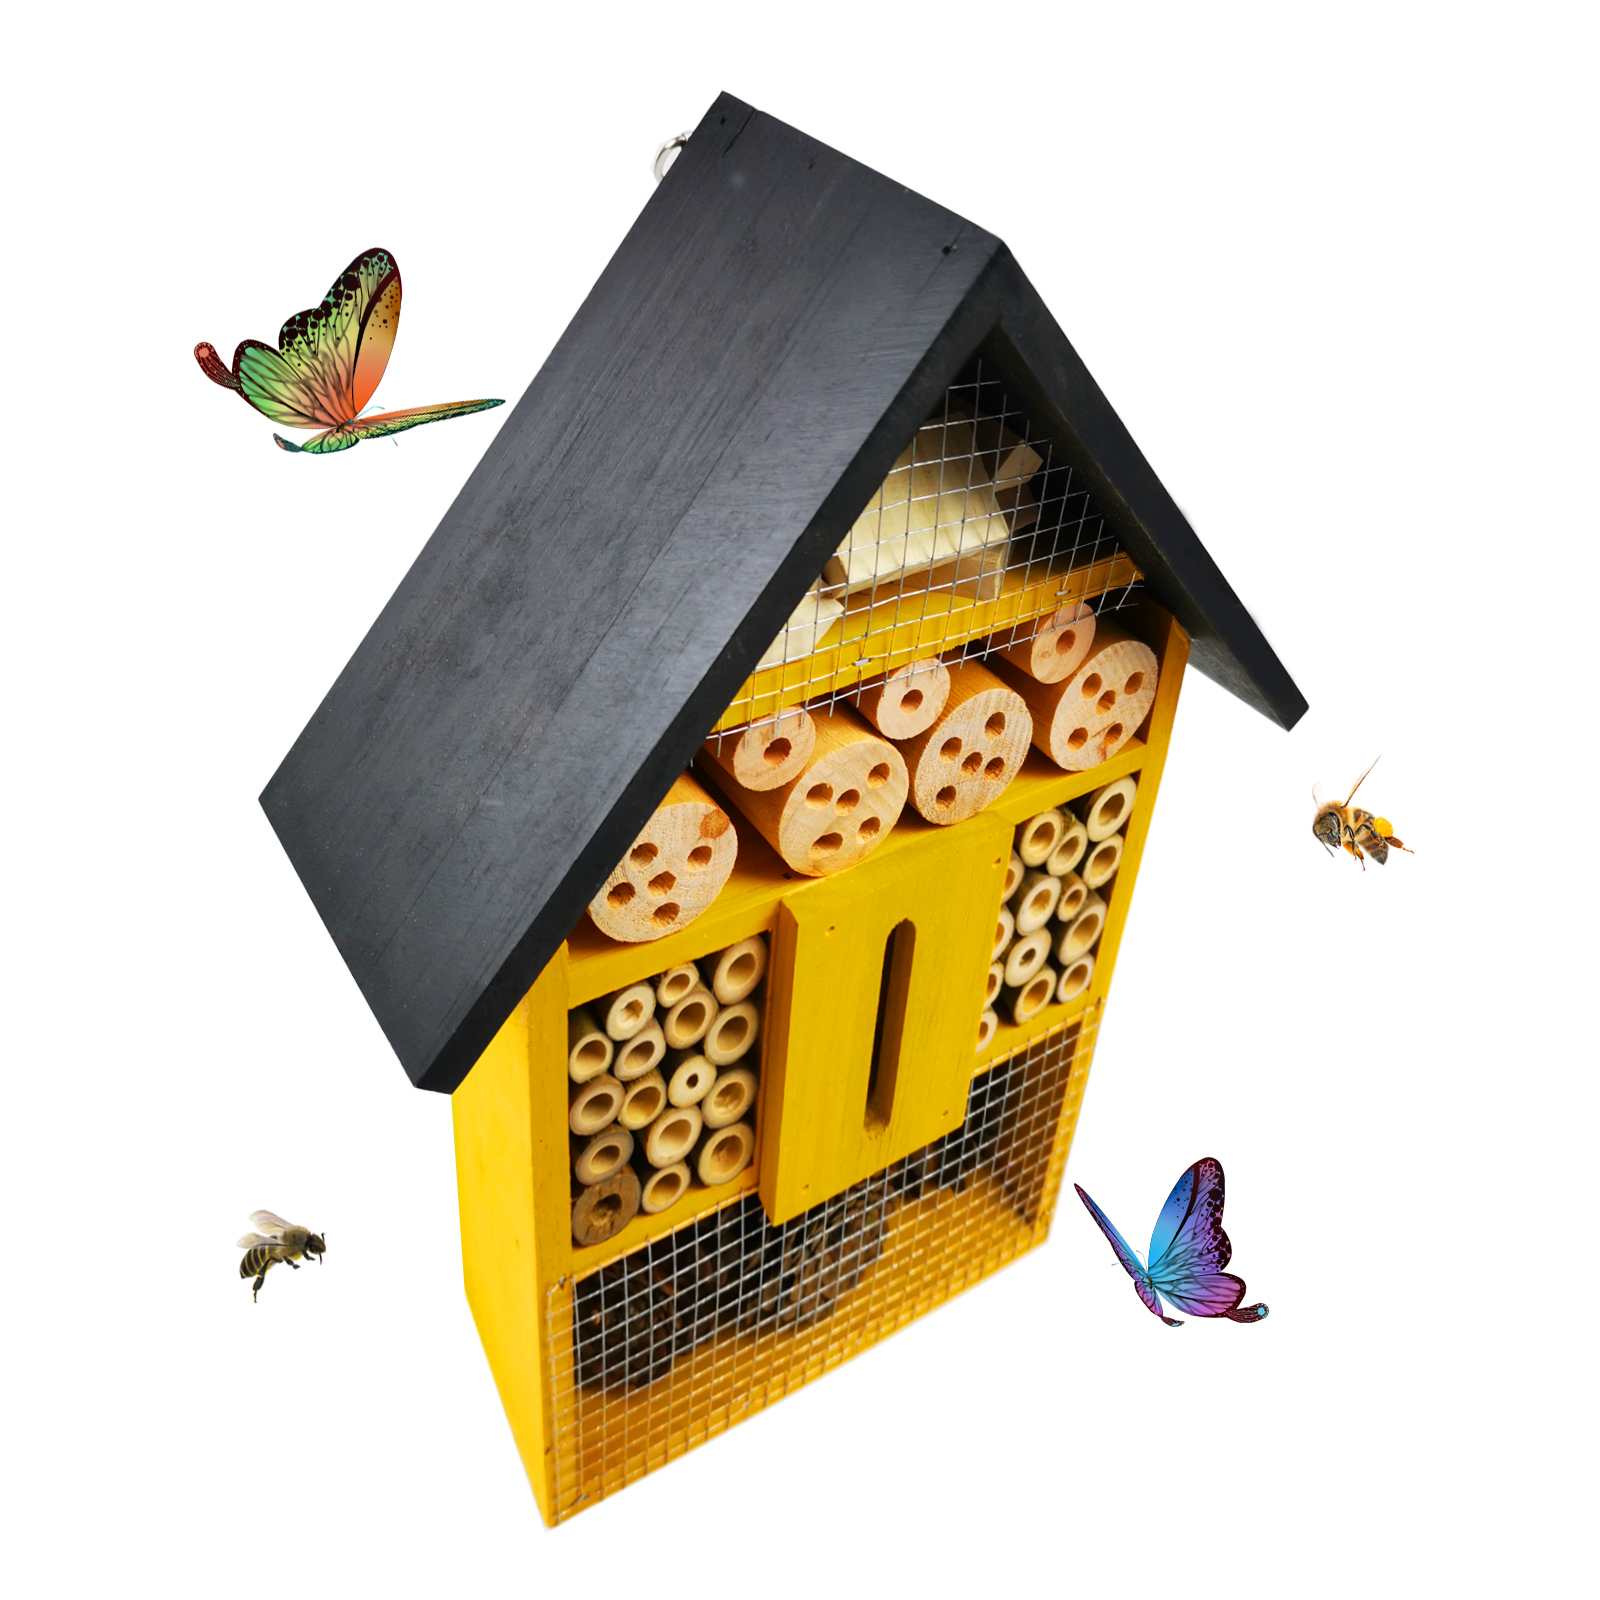 Wooden Insect Hotel for Butterfly, Mason Bees & Ladybugs